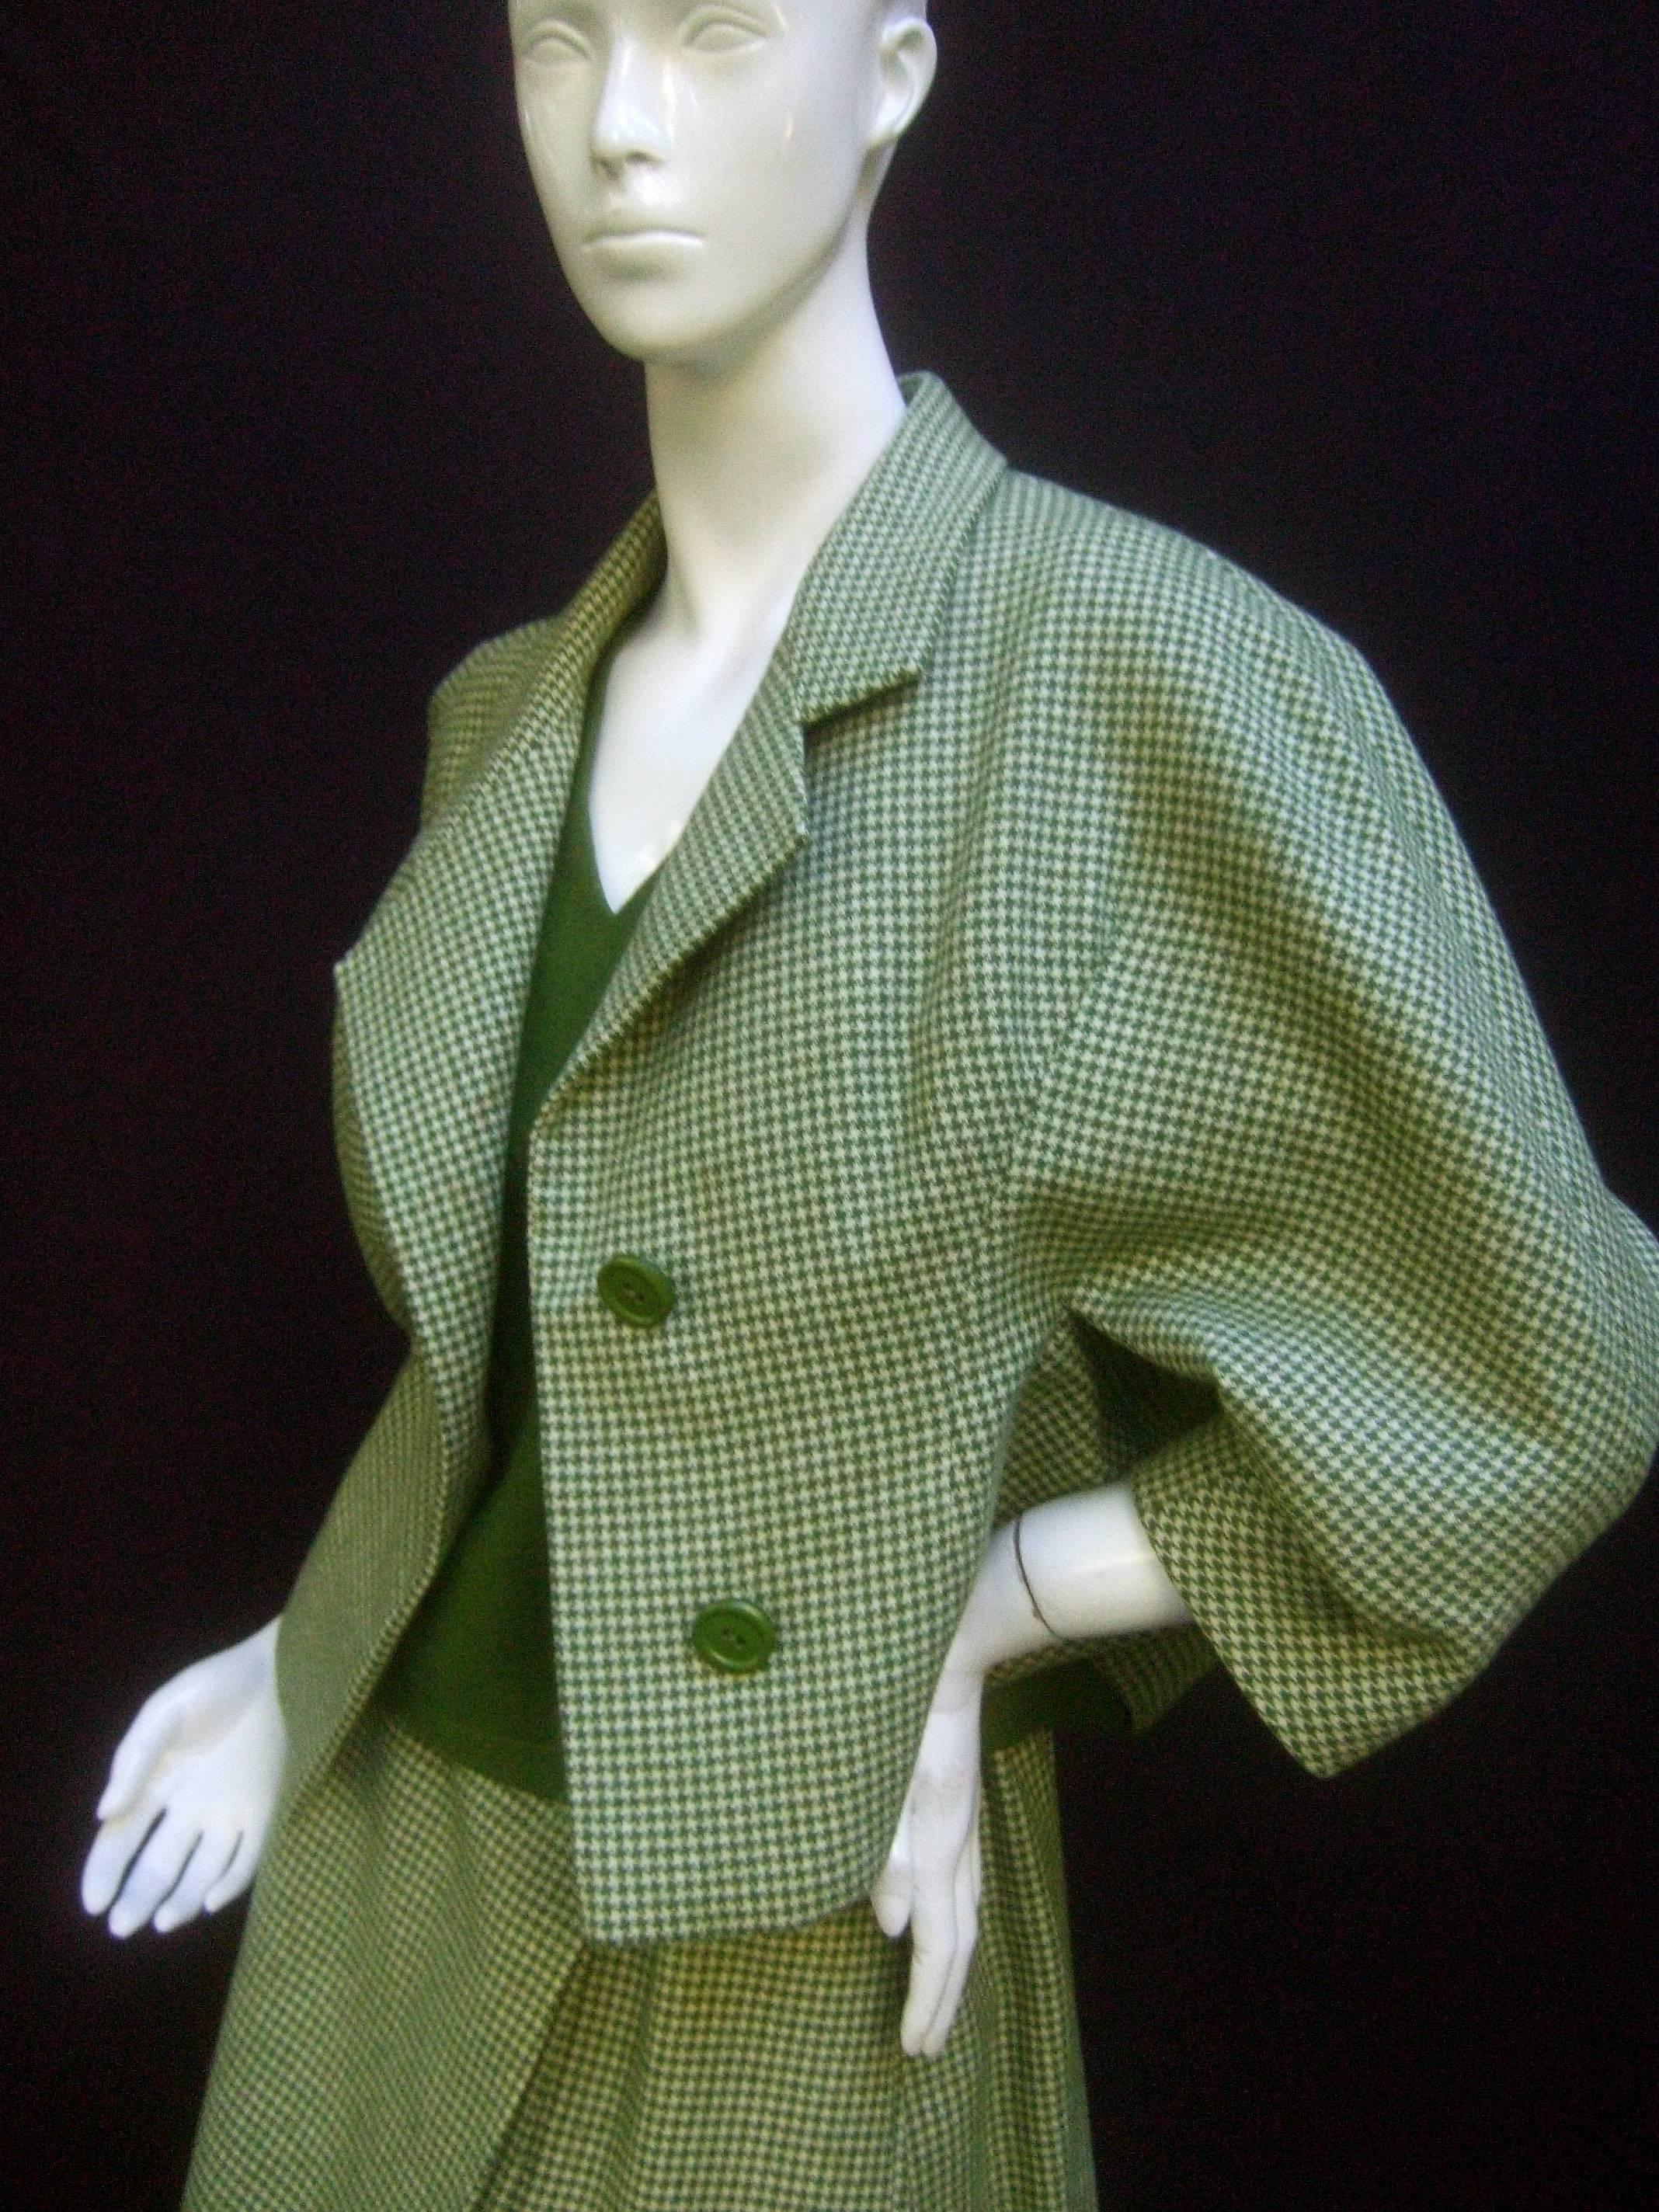 Galanos 1970s green wool houndstooth skirt suit ensemble 
The stylish retro skirt suit is designed with a matching 
green and white houndstooth checkered jacket and skirt 
 
The jacket silhouette has voluminous raglan sleeves 
The sleeveless shell